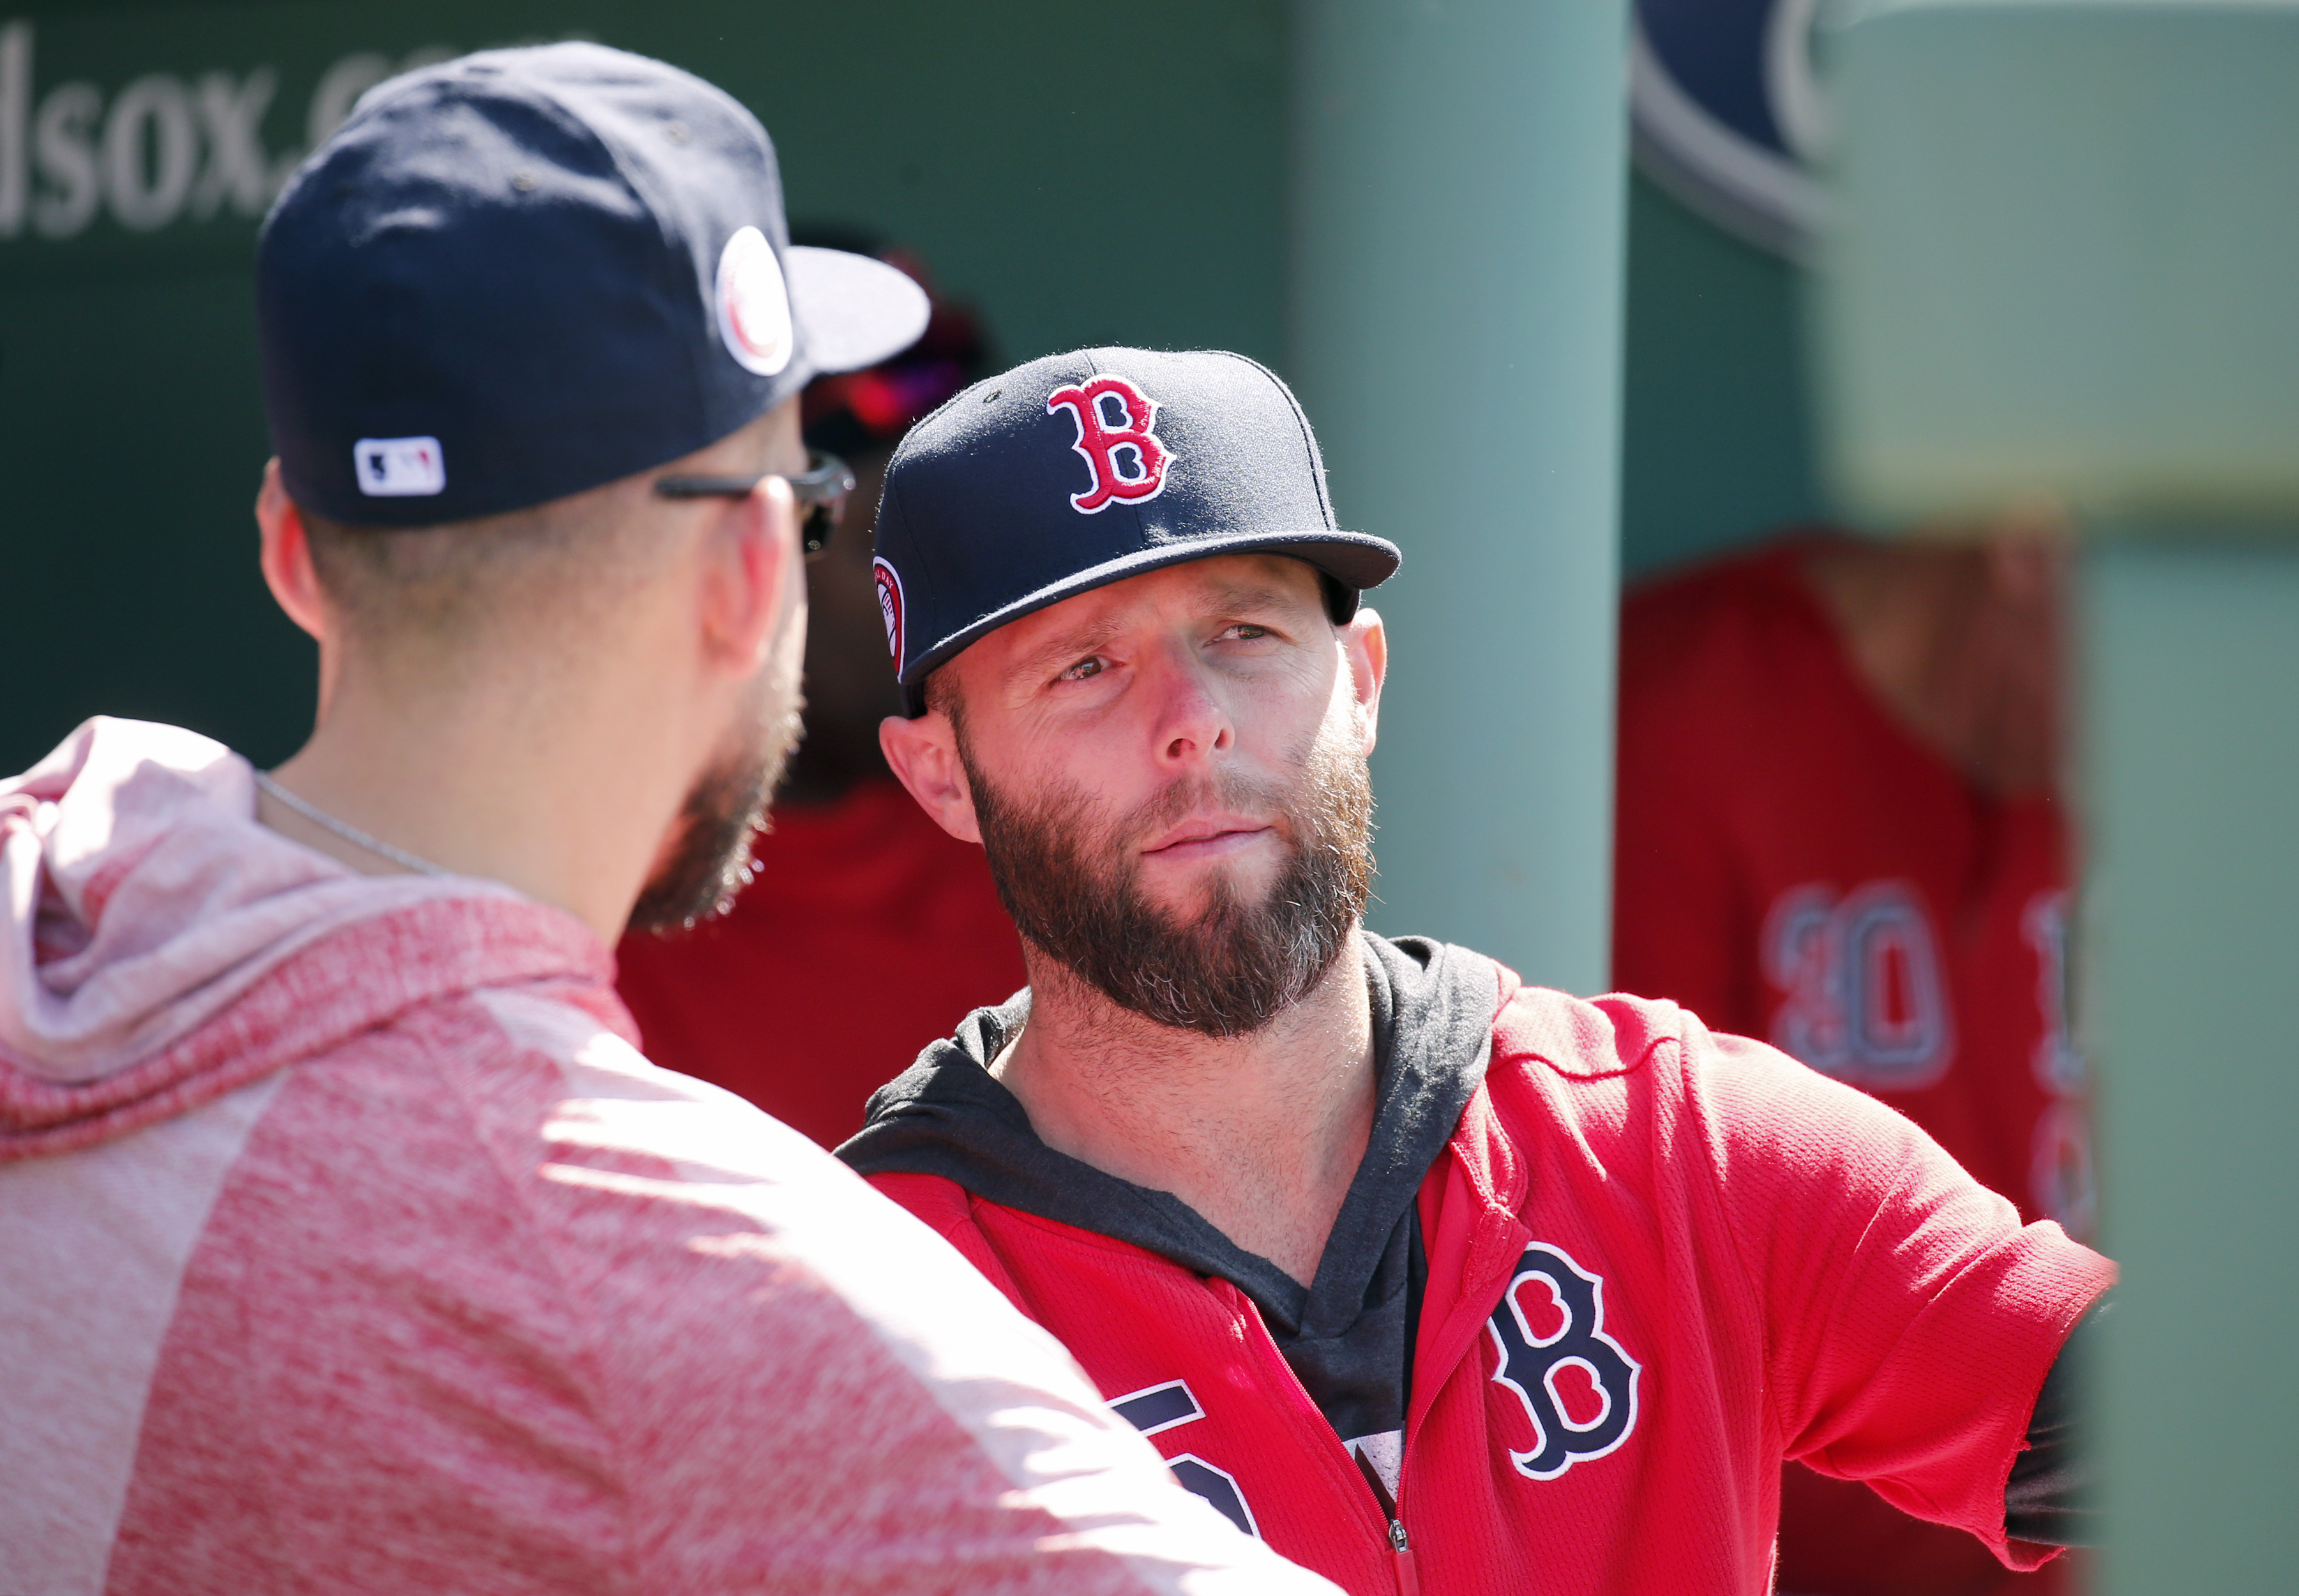 Dustin Pedroia retires: Coaching son's team helped Boston Red Sox